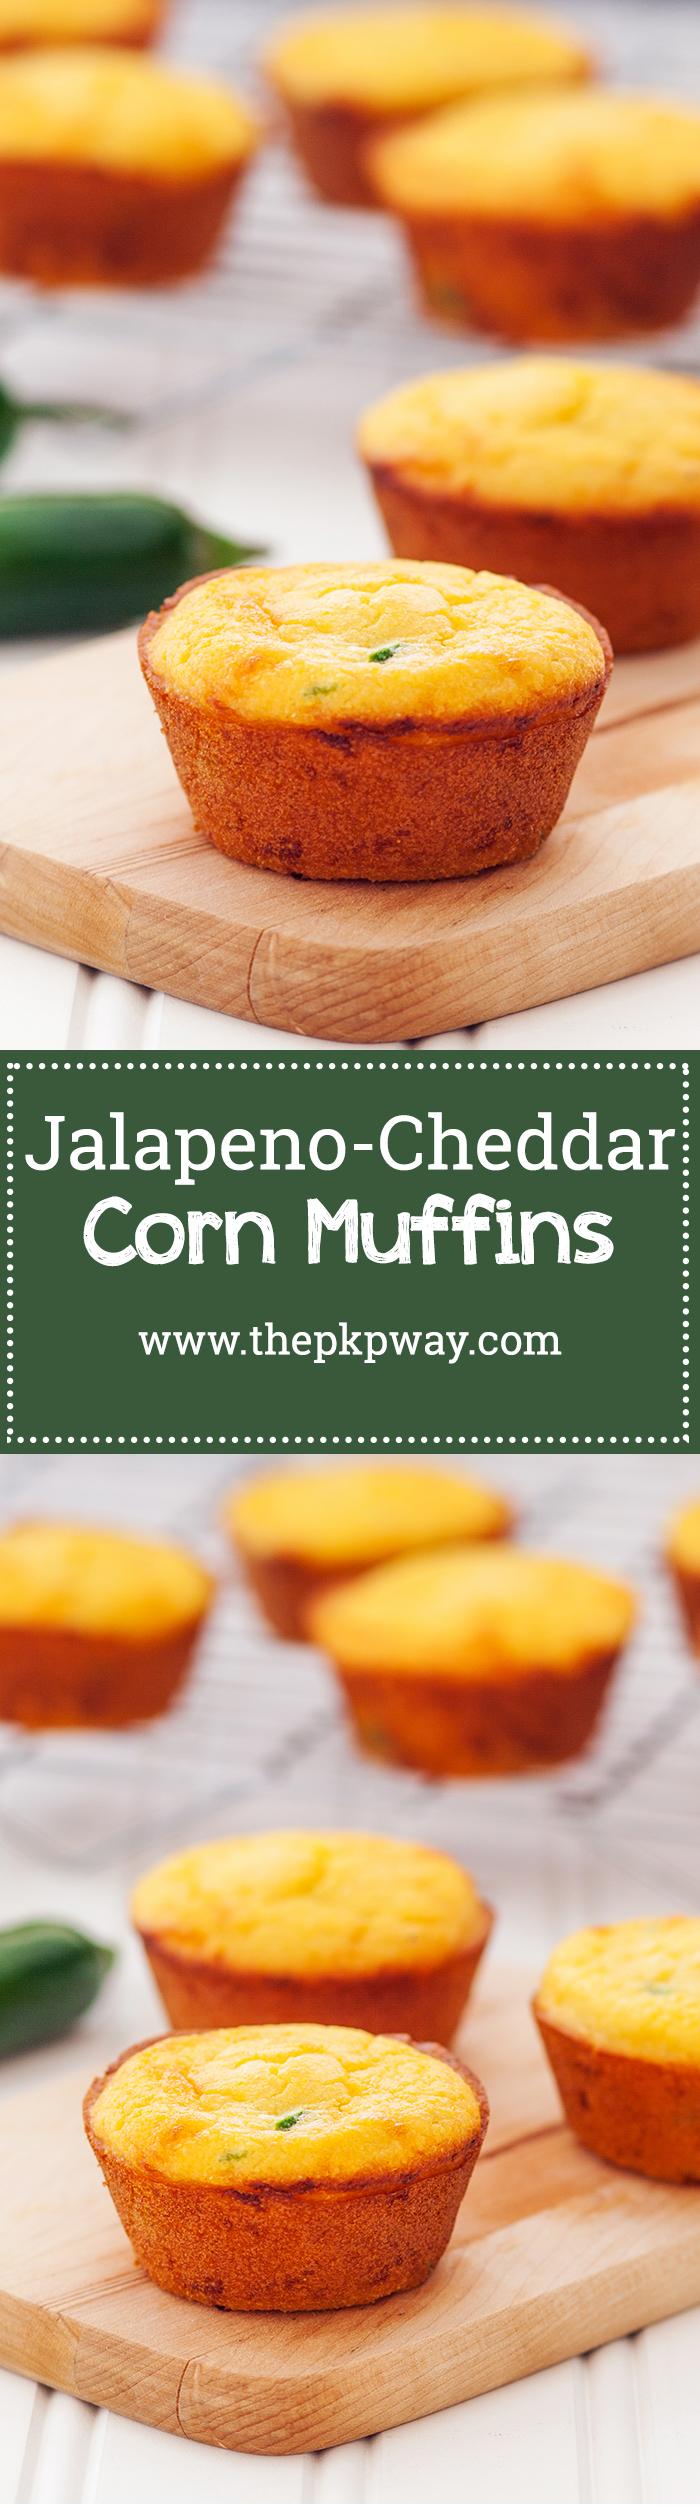 Jalapeño-cheddar cornbread muffins. Crackly exterior, ultra-moist interior, and a punch of cheesy and jalapeño-y flavor! 